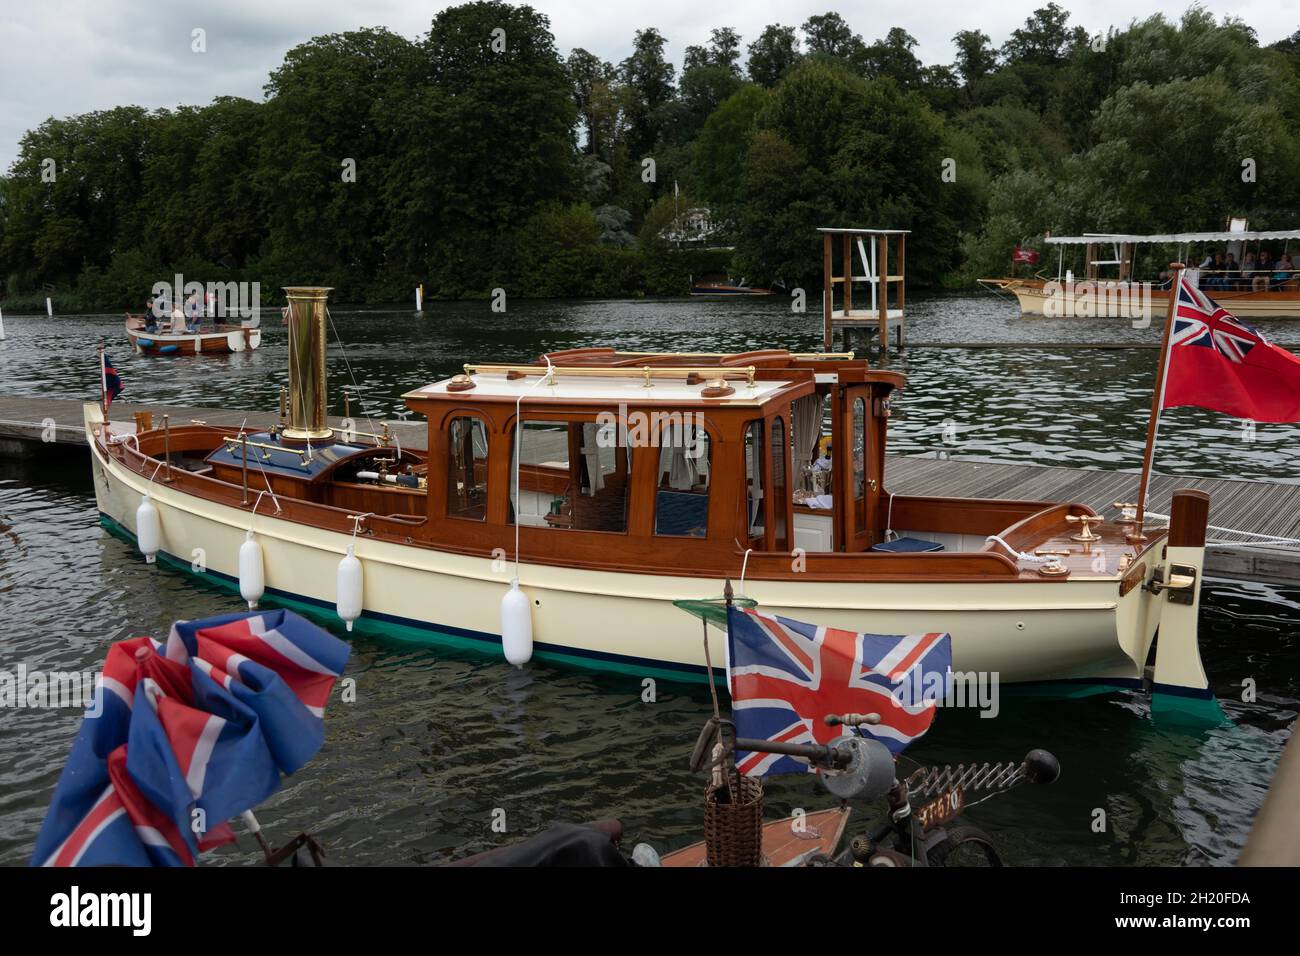 Vintage Steam boat at the Thames Traditional Boat Festival at Henley Upon Thames England with red ensign and union flags flown Stock Photo